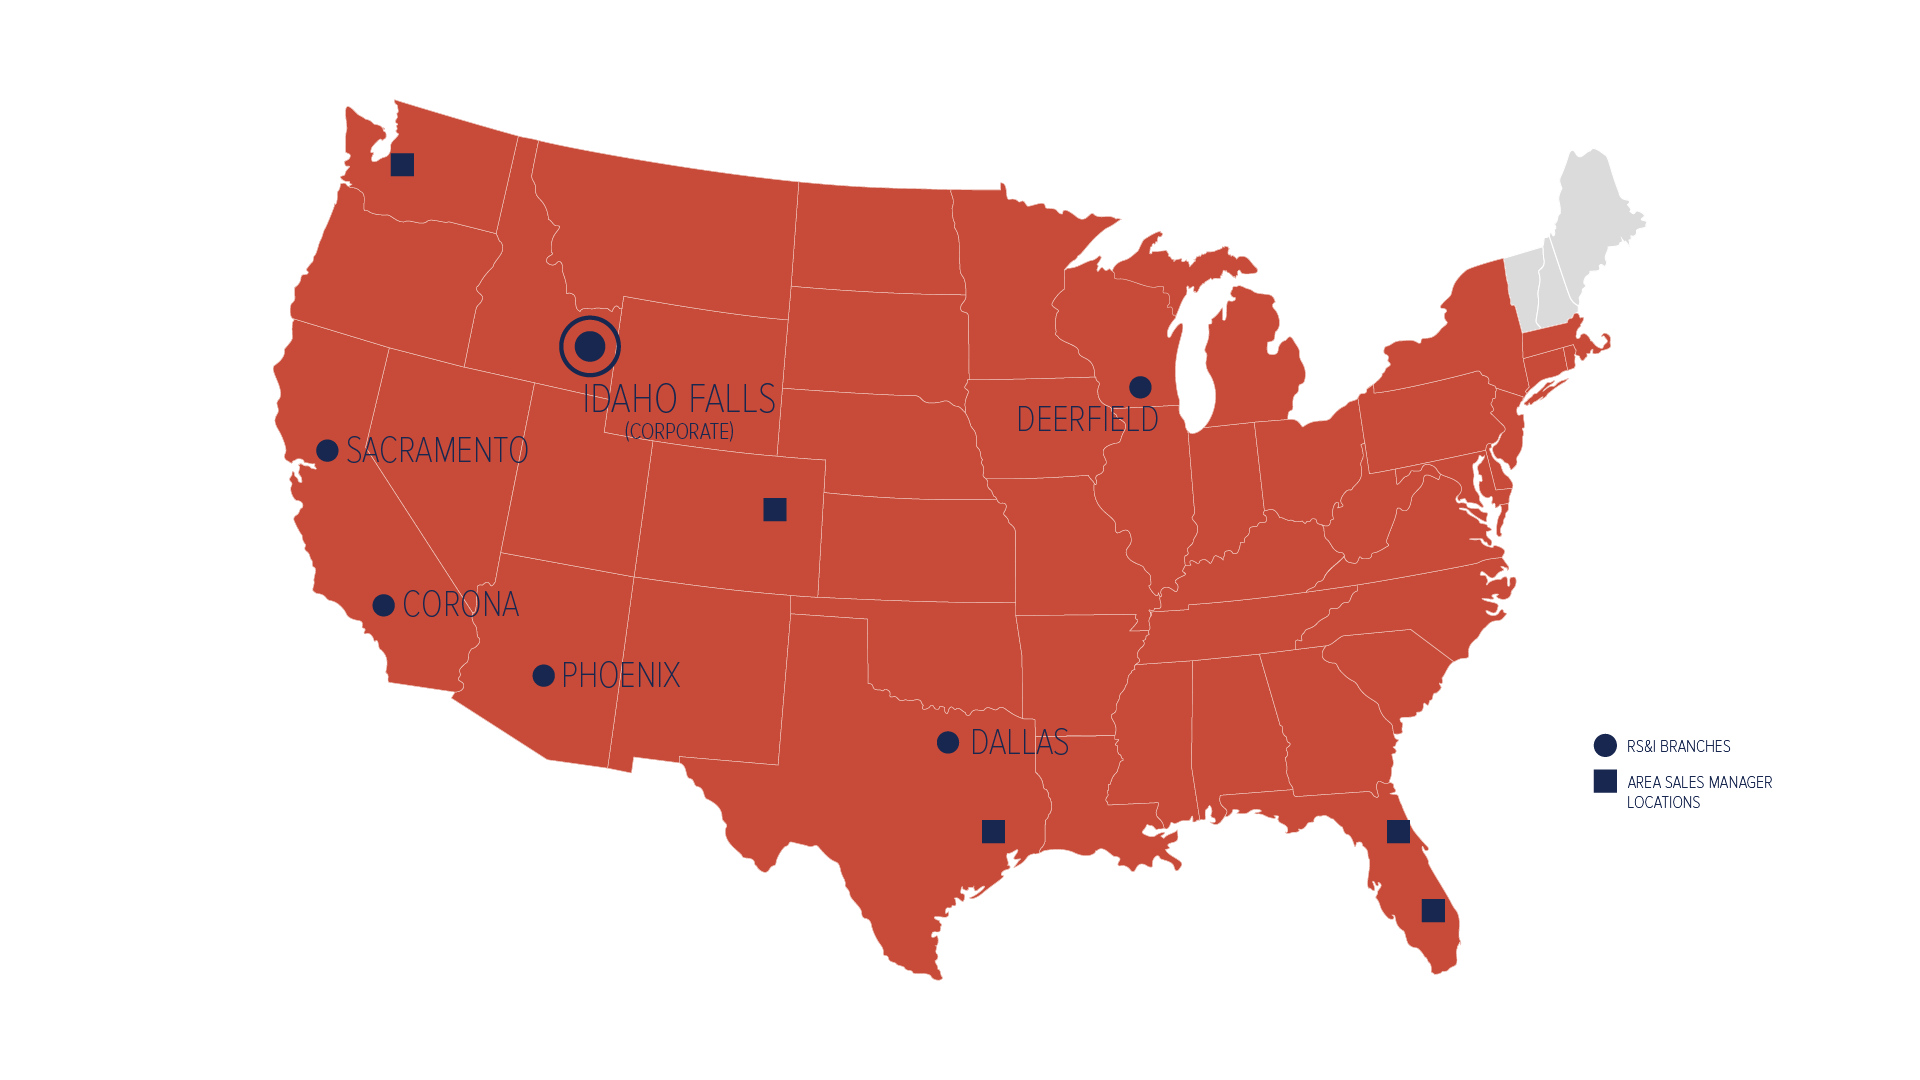 United States map showing Vivint coverage